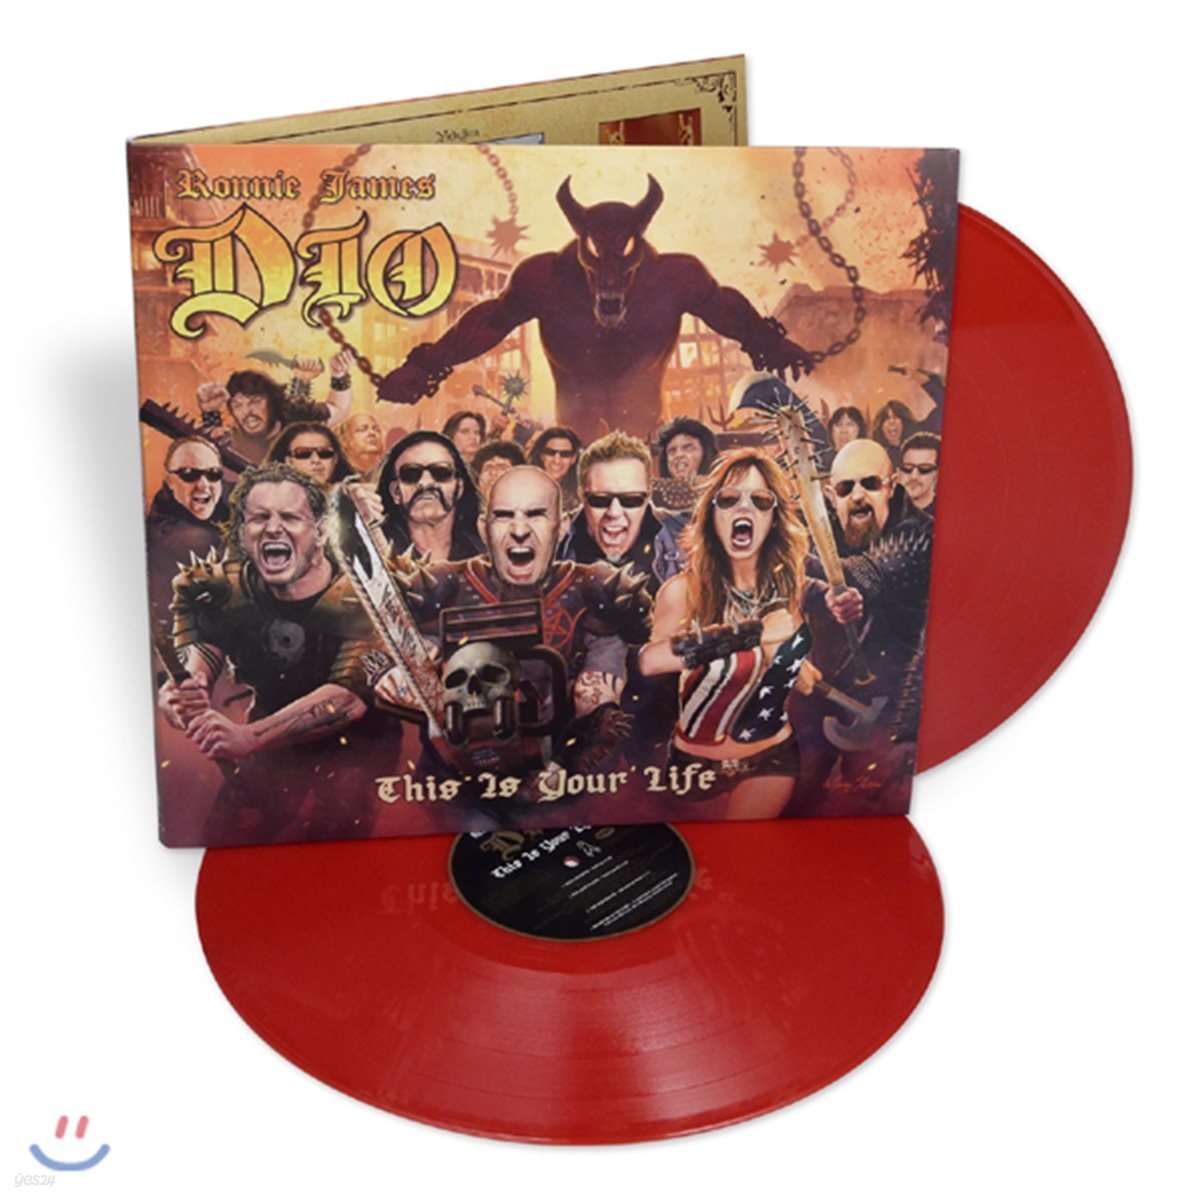 Ronnie James Dio Tribute: This Is Your Life (로니 제임스 디오 트리뷰트 앨범) [레드 컬러 2LP]